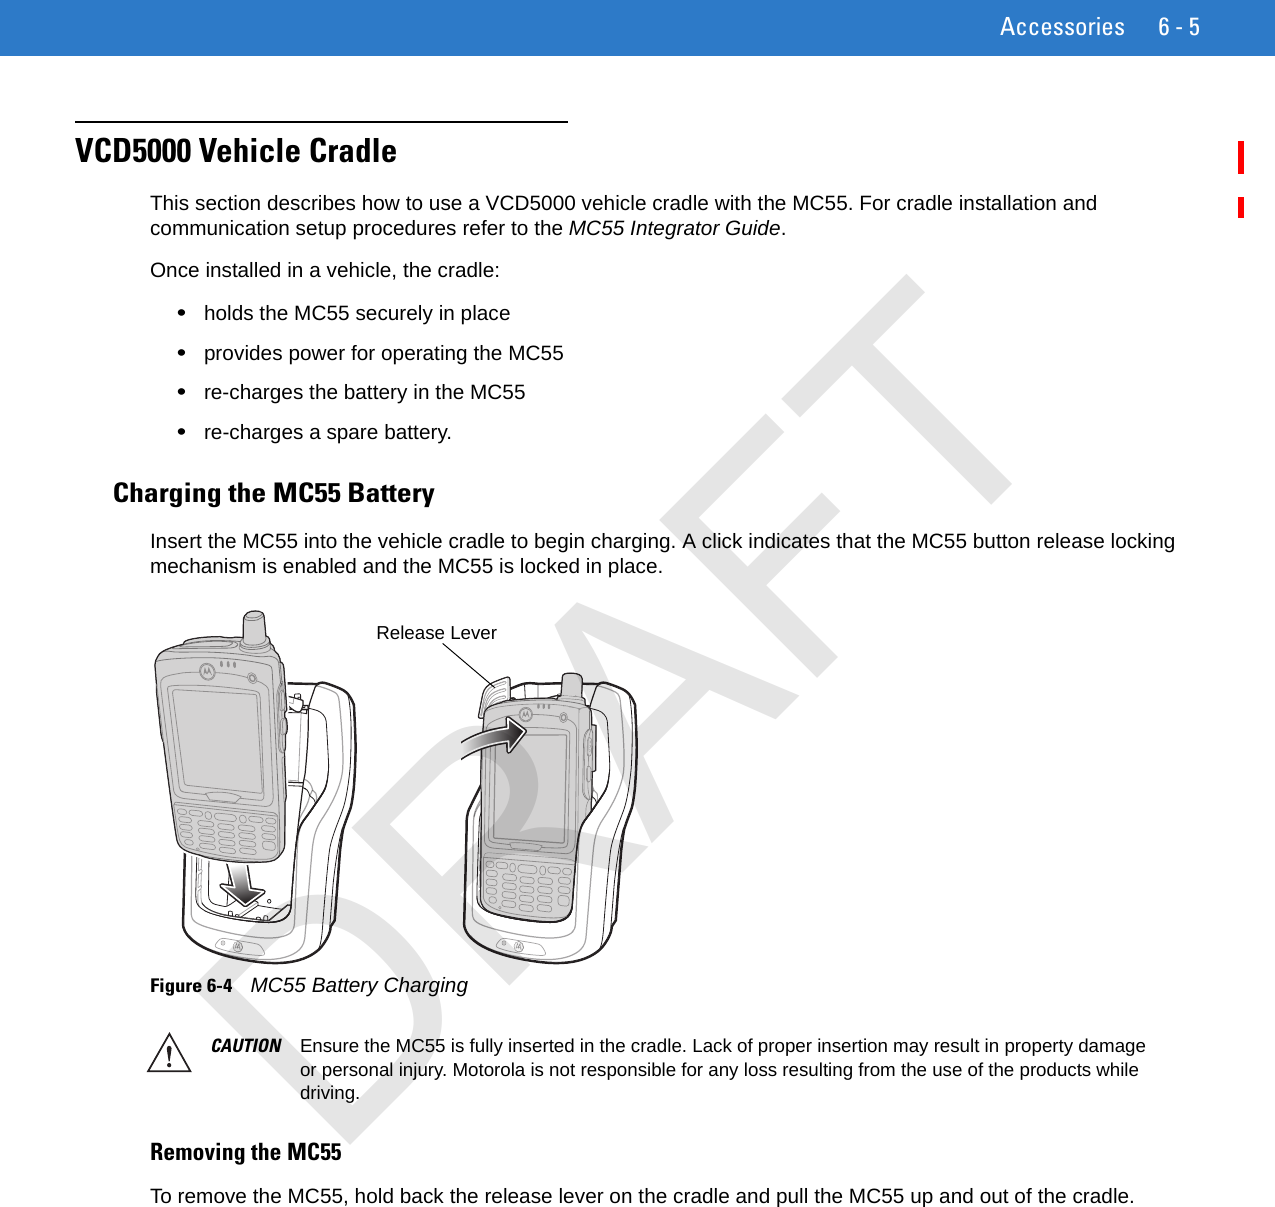 Accessories 6 - 5VCD5000 Vehicle CradleThis section describes how to use a VCD5000 vehicle cradle with the MC55. For cradle installation and communication setup procedures refer to the MC55 Integrator Guide.Once installed in a vehicle, the cradle:•holds the MC55 securely in place•provides power for operating the MC55•re-charges the battery in the MC55•re-charges a spare battery.Charging the MC55 BatteryInsert the MC55 into the vehicle cradle to begin charging. A click indicates that the MC55 button release locking mechanism is enabled and the MC55 is locked in place.Figure 6-4    MC55 Battery Charging Removing the MC55To remove the MC55, hold back the release lever on the cradle and pull the MC55 up and out of the cradle.Release LeverCAUTION Ensure the MC55 is fully inserted in the cradle. Lack of proper insertion may result in property damage or personal injury. Motorola is not responsible for any loss resulting from the use of the products while driving. DRAFT